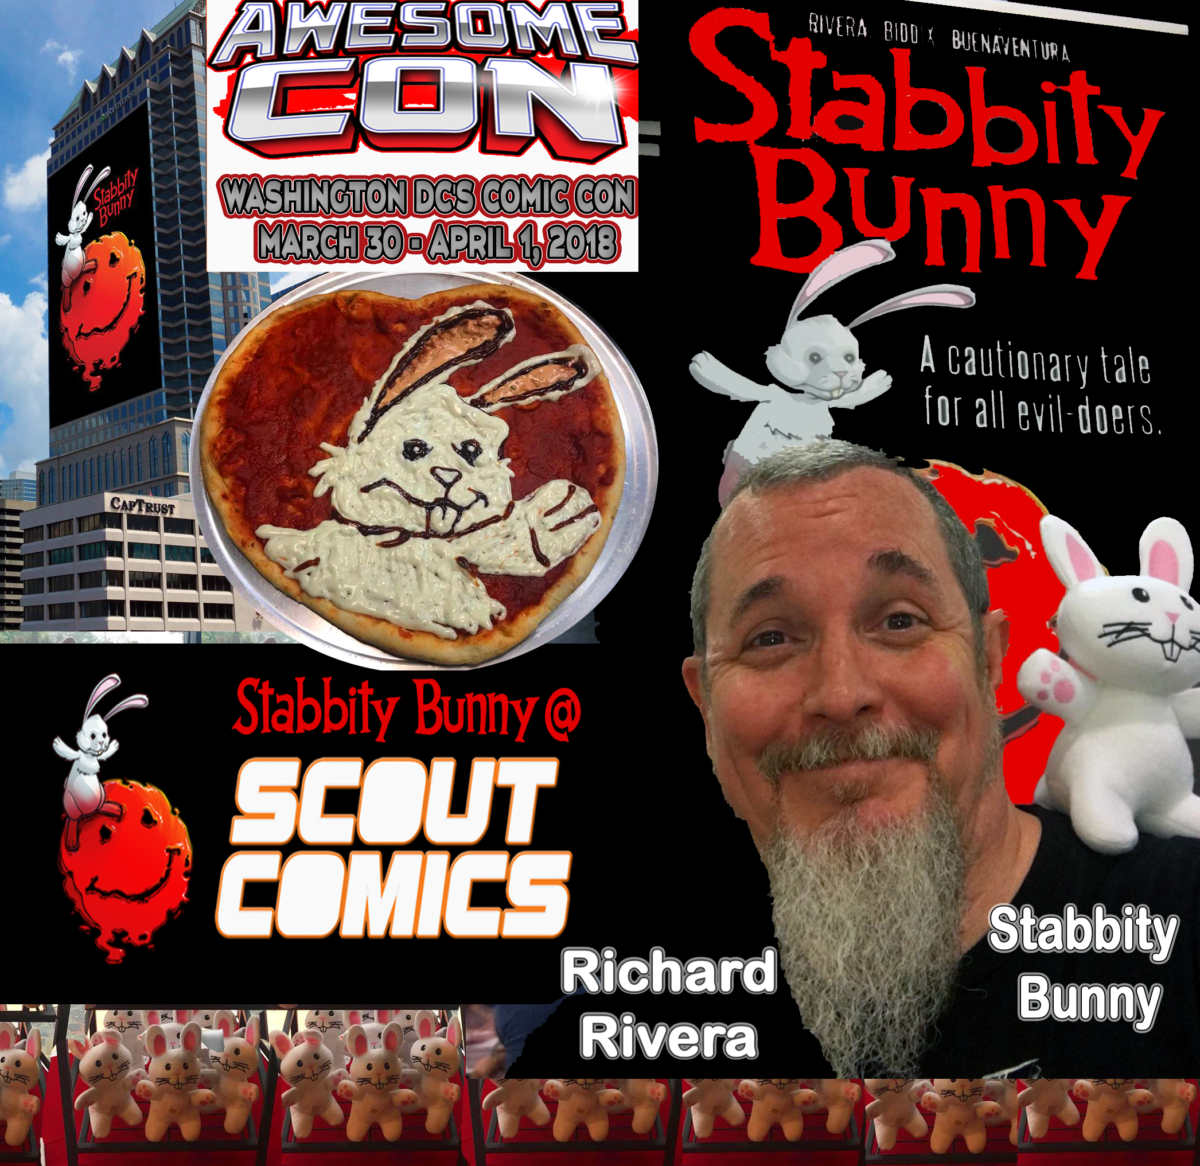 COMIC CON HIGHWAY EXITING  in the SOUTH:: -DC- AWESOME CON will be full of Stabbity Bunnies  on  March 30-April 1, When Richard Rivera  Tables at Q-03 .